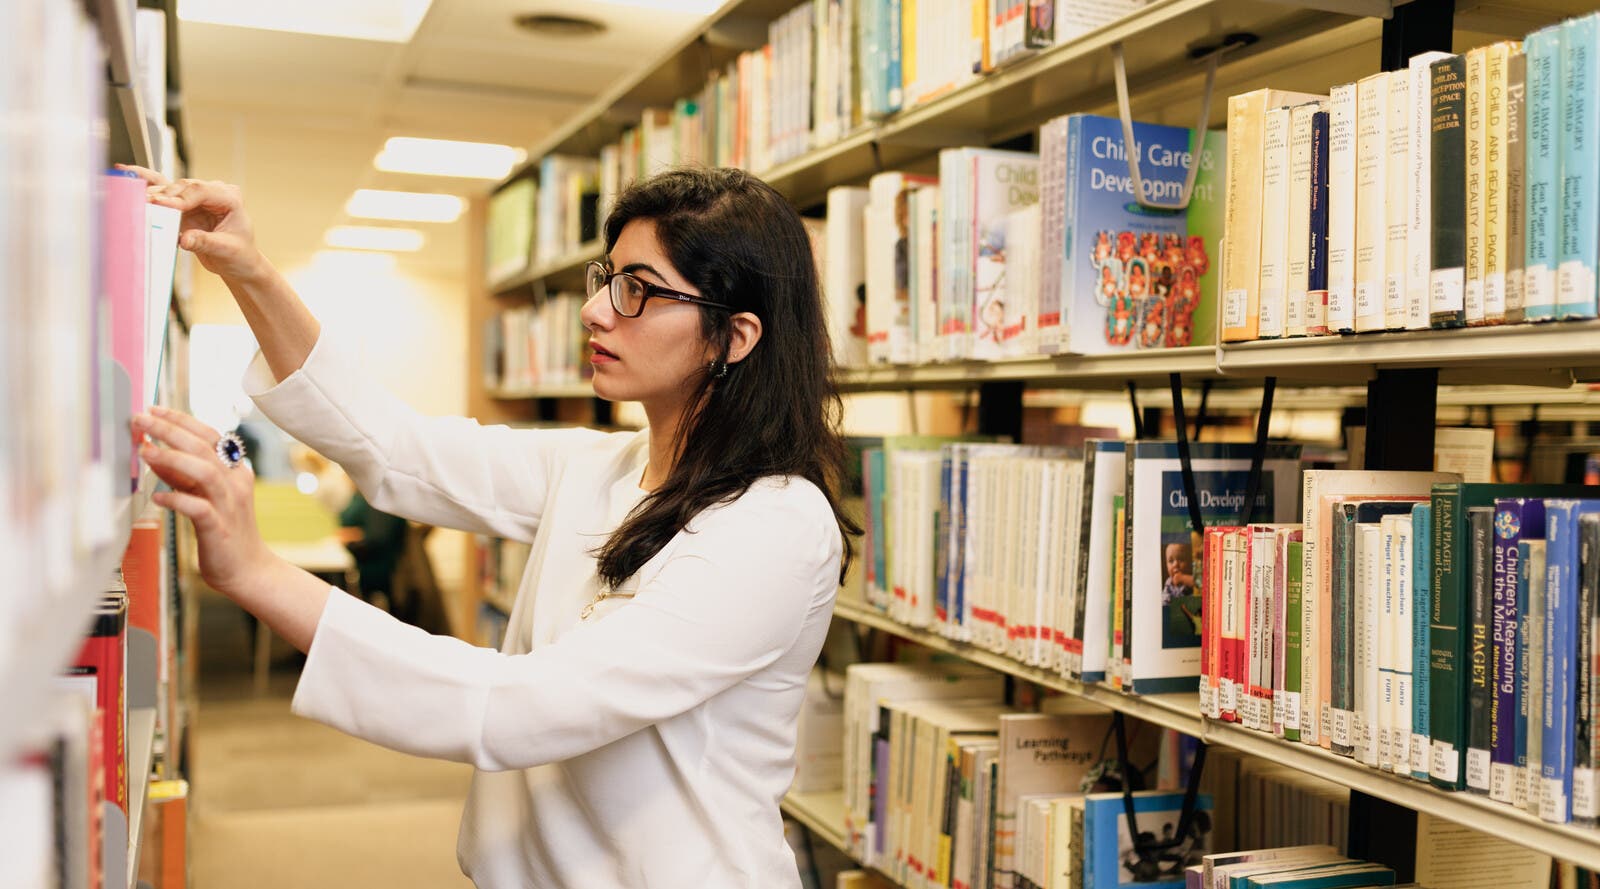 Student looking through bookshelf in library